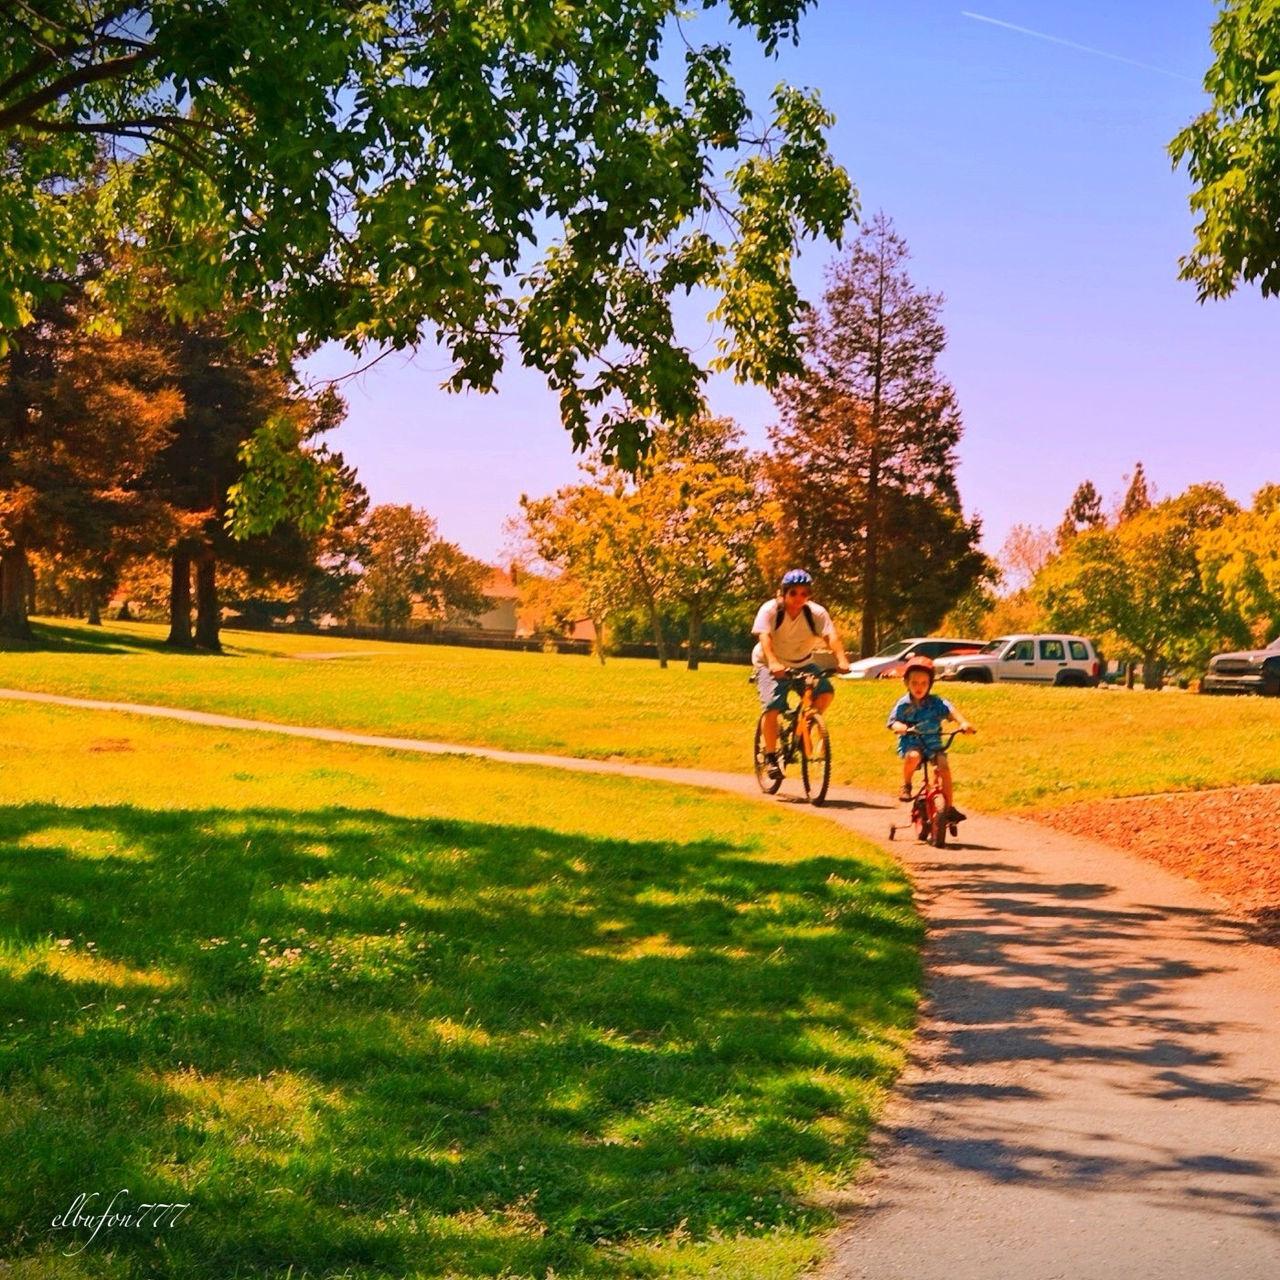 tree, grass, bicycle, leisure activity, men, lifestyles, park - man made space, shadow, field, park, full length, green color, transportation, growth, person, sunlight, grassy, walking, footpath